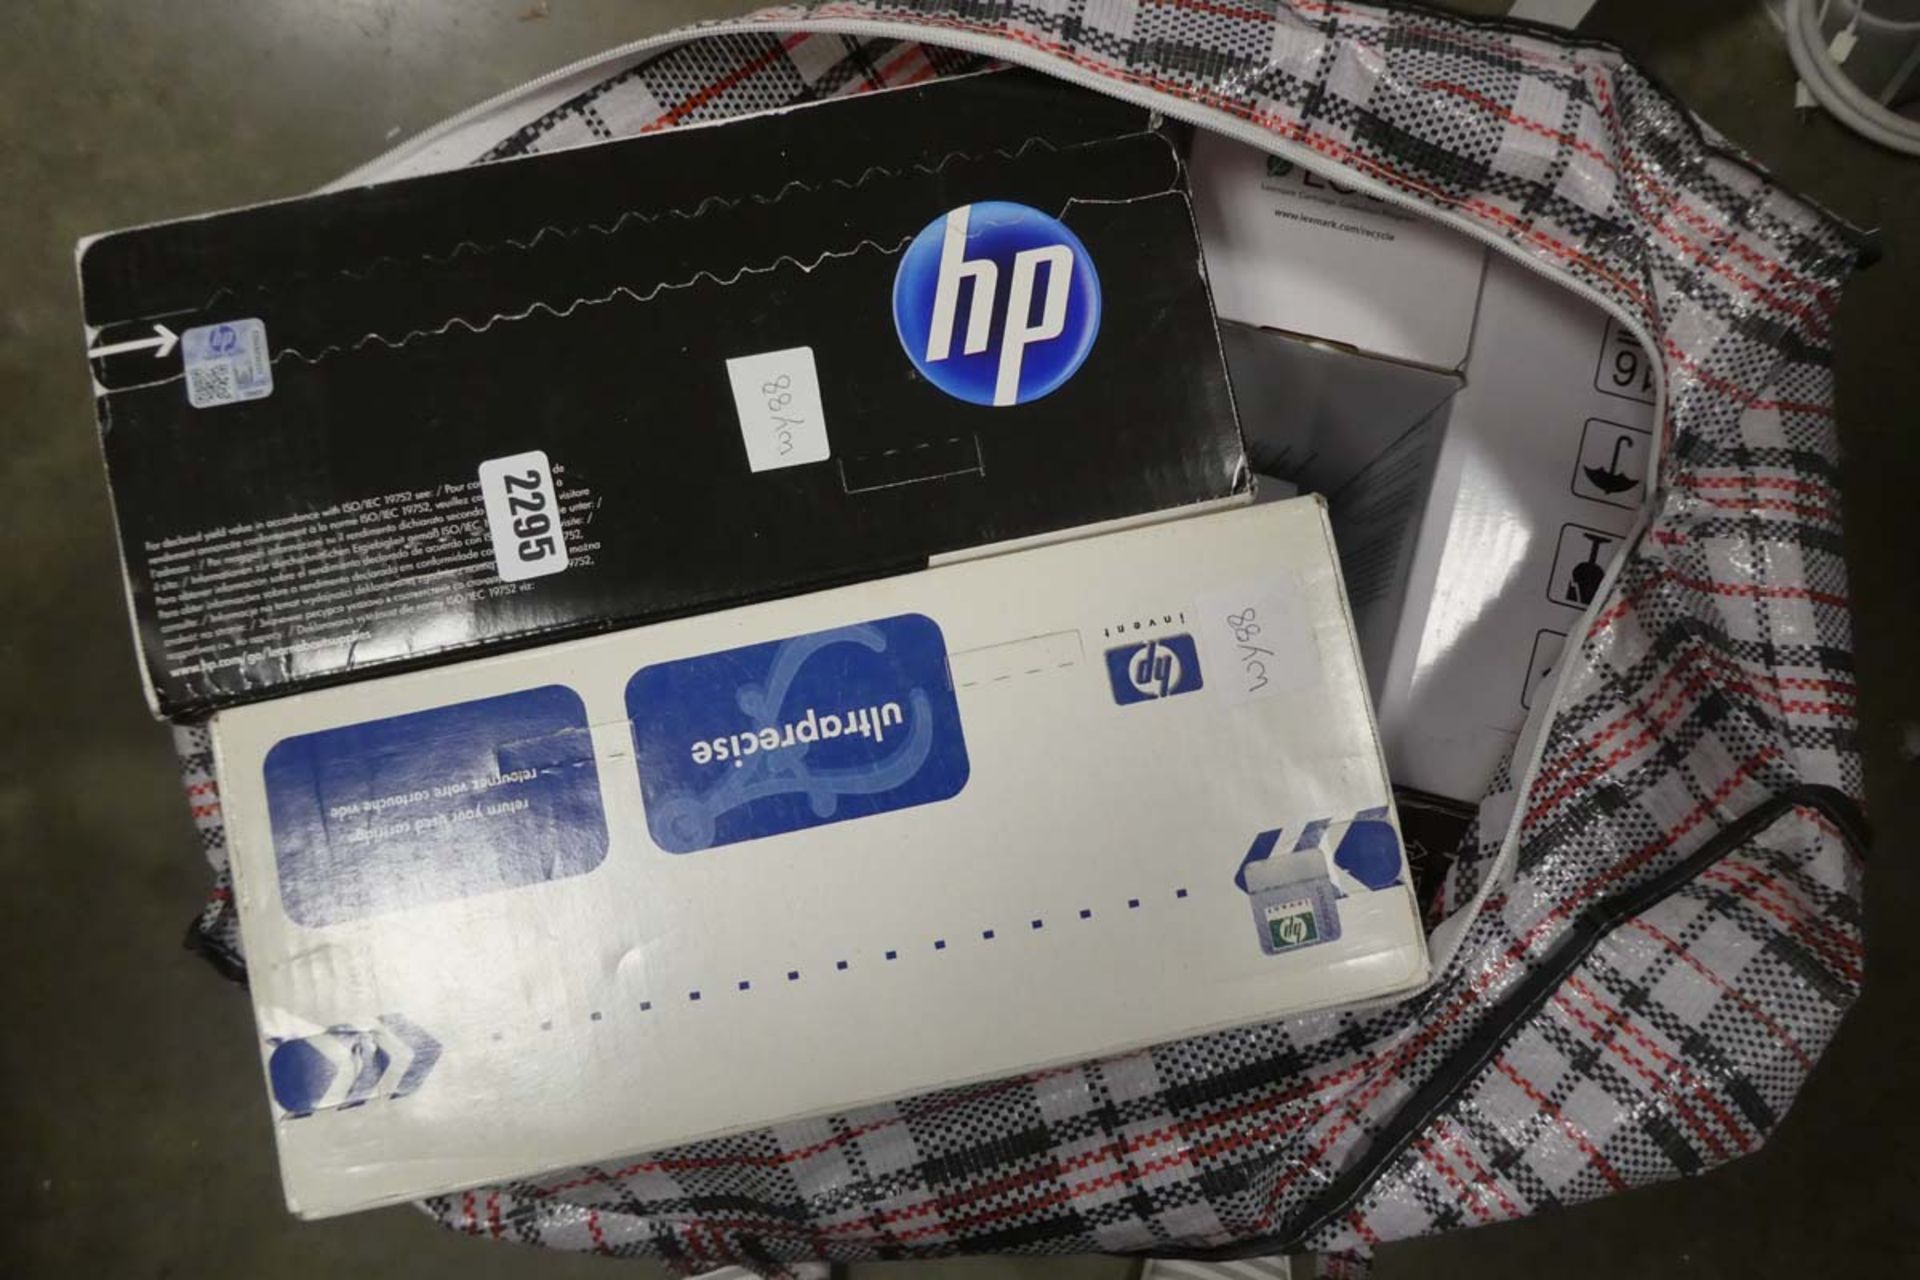 Bag of HP and other toner replacement cartridges